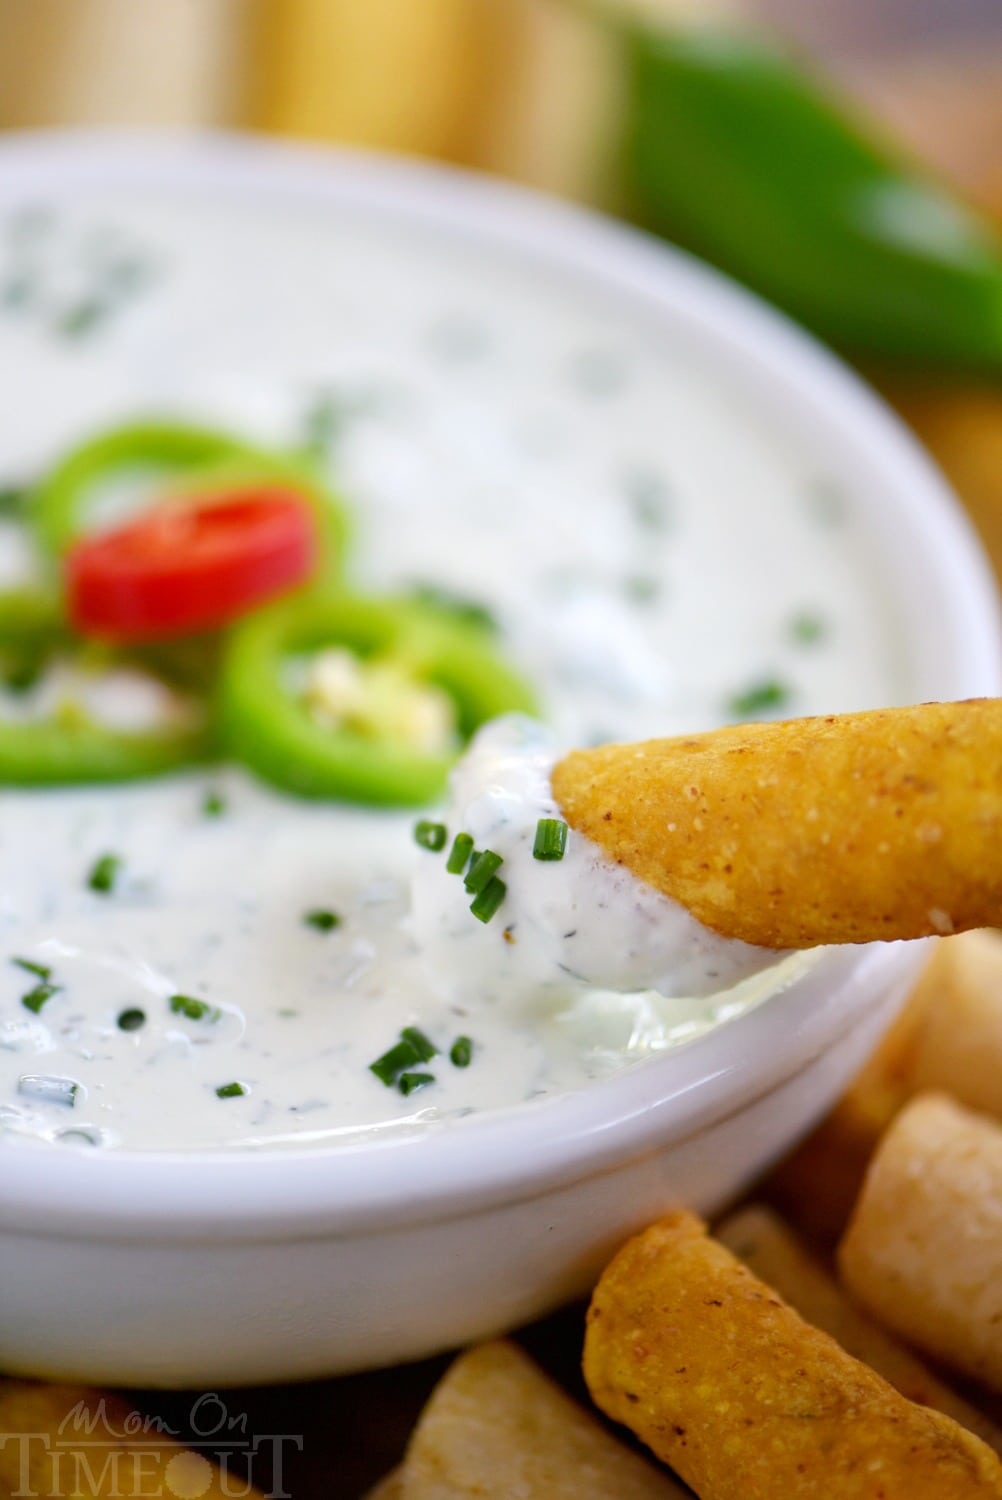 This easy Spicy Ranch Dip is made with Greek yogurt and lots of fresh ingredients for tremendous, bold flavor! Great for dipping all your favorite snacks! | Mom On Timeout